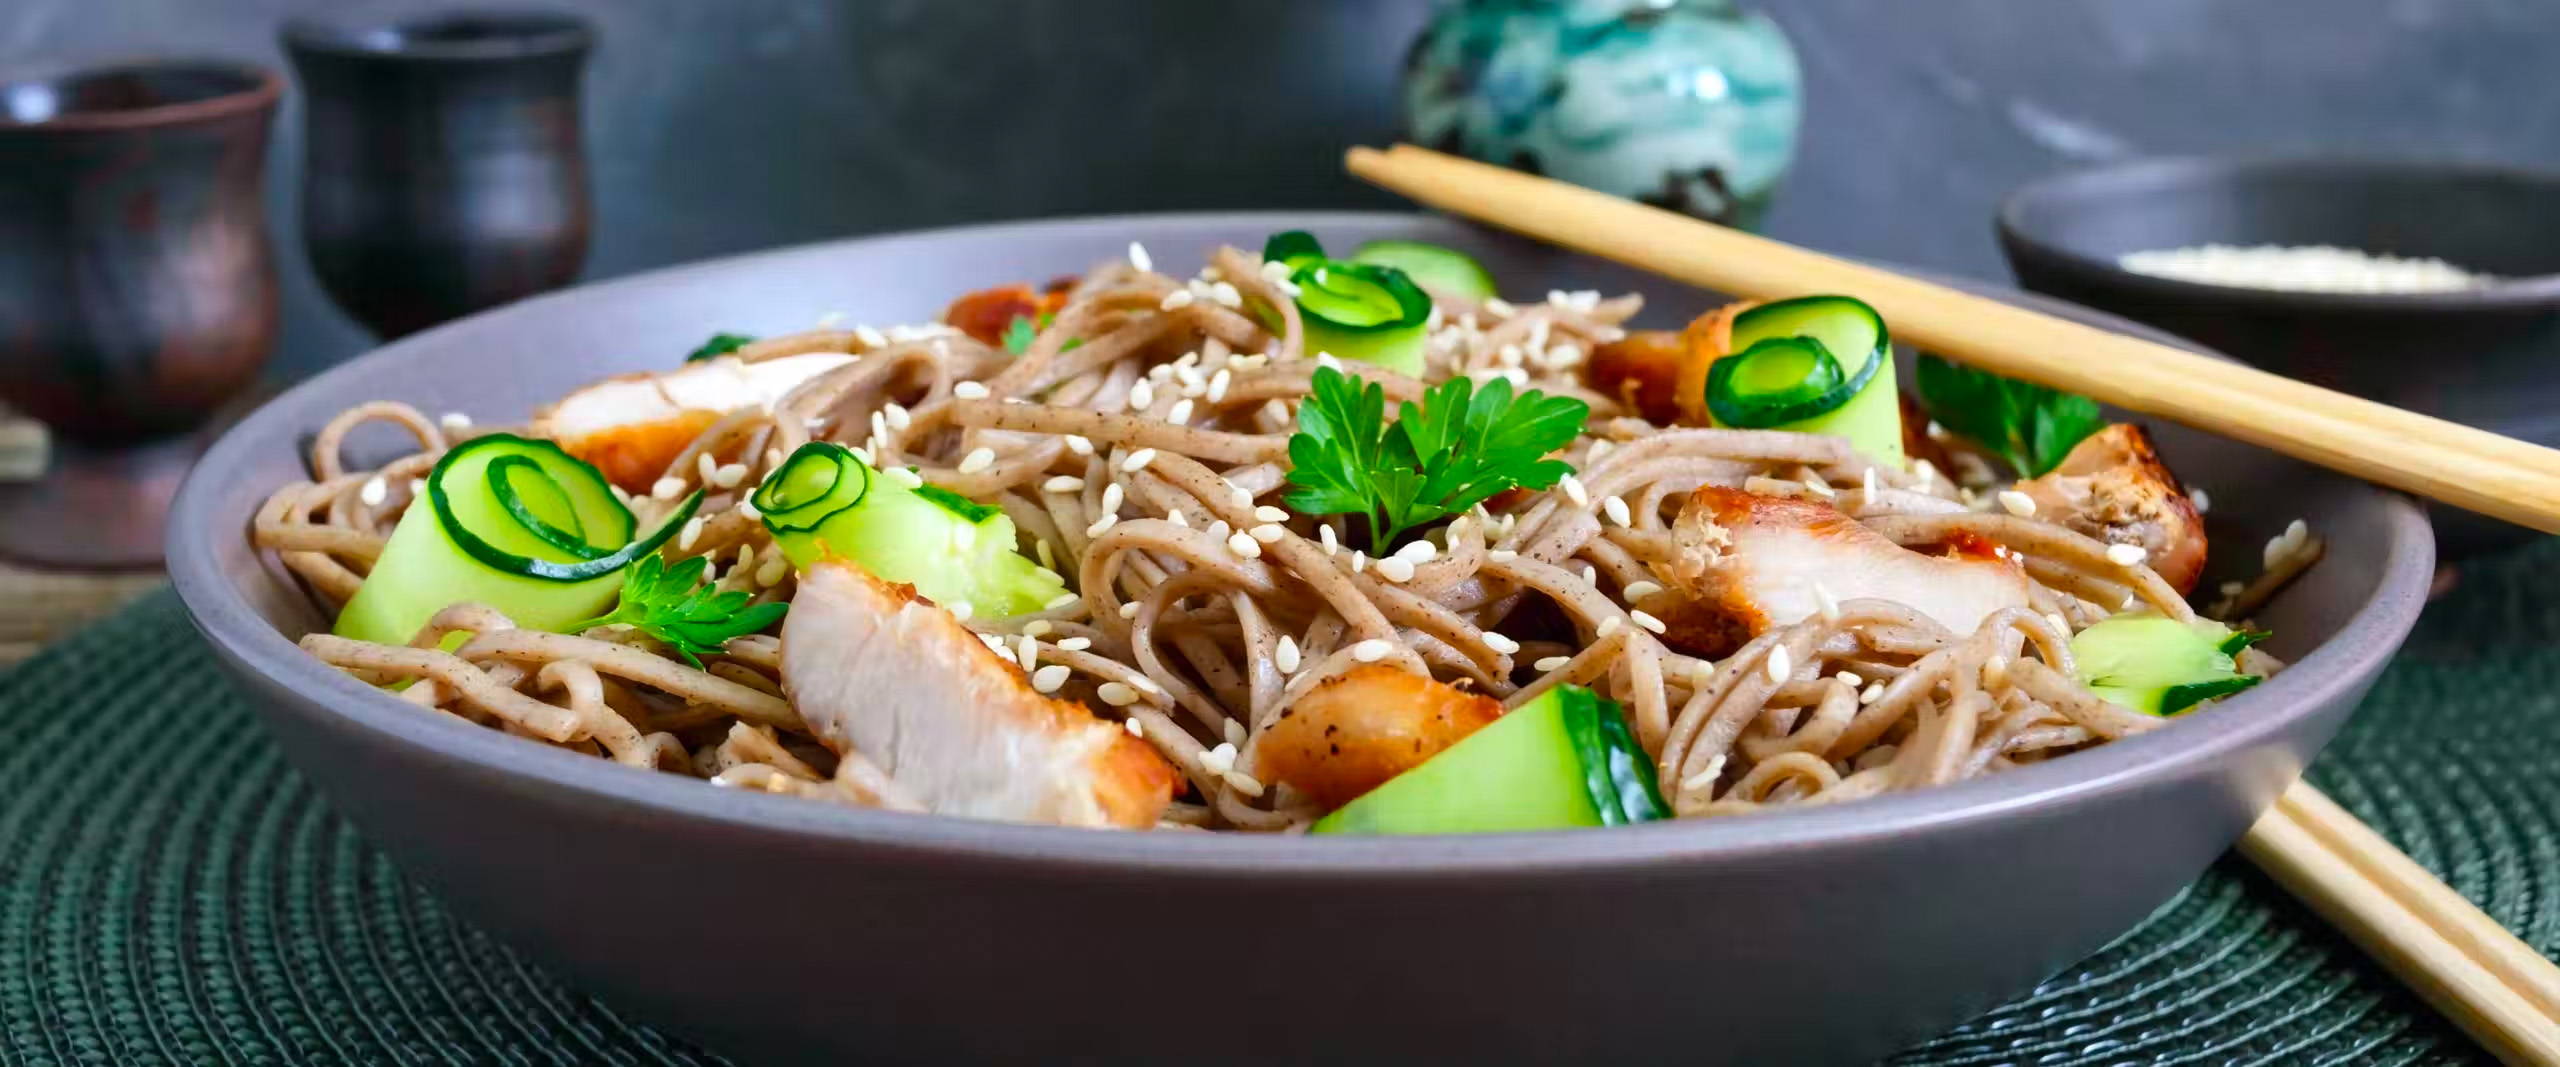 Bowl of sesame noodles with chicken, and chop sticks on the side.